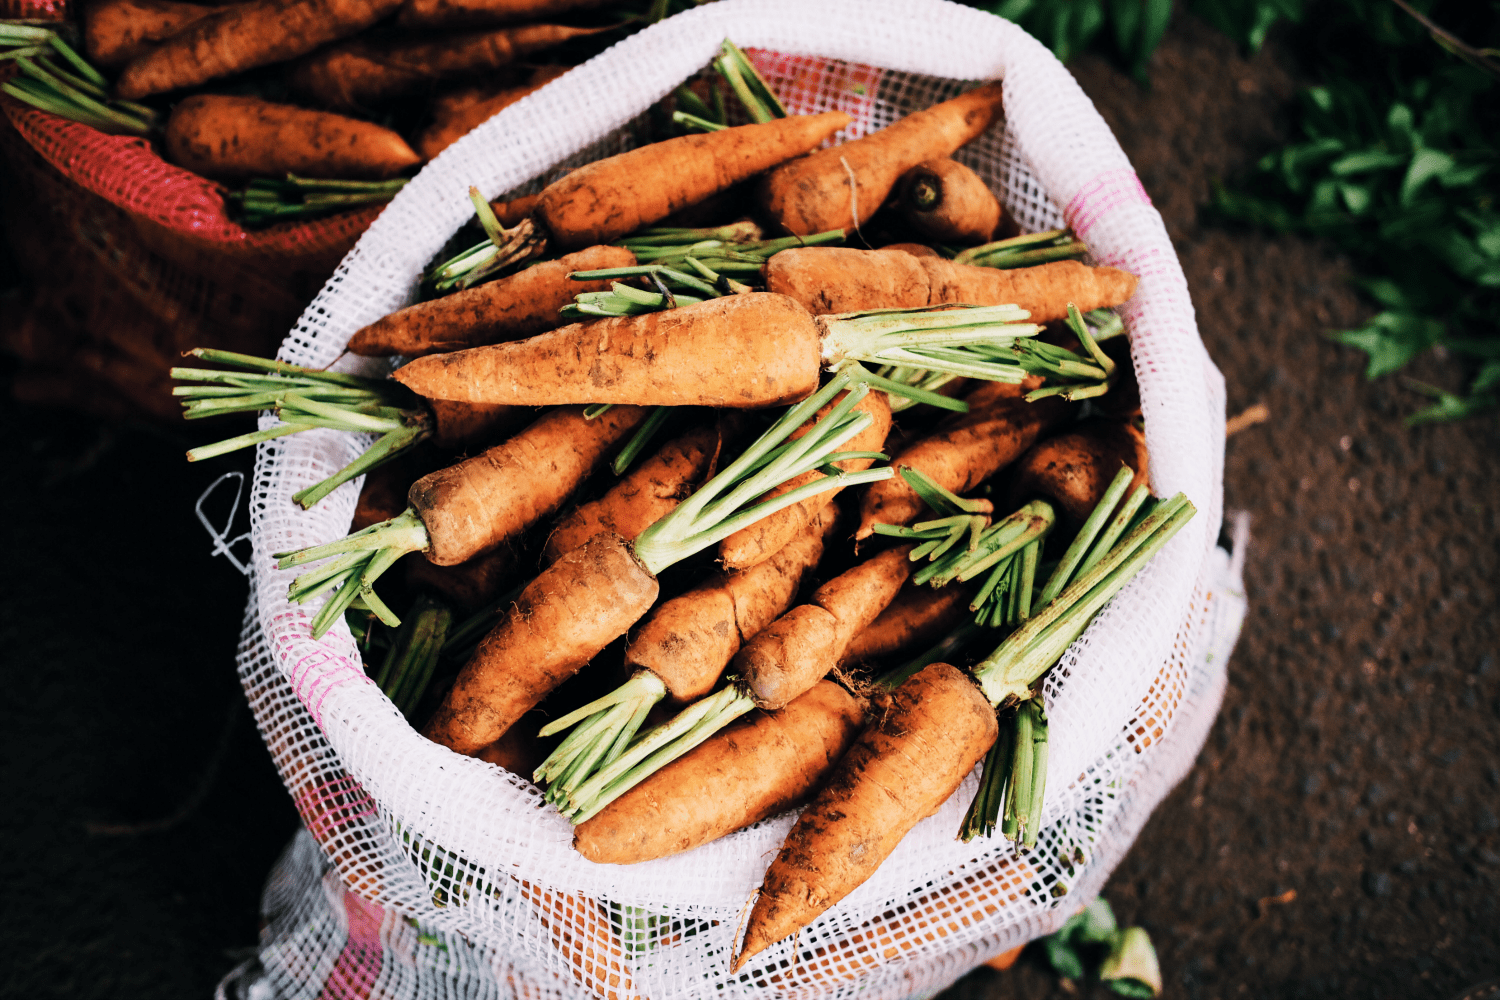 A large basket of carrots just harvested from the dirt.